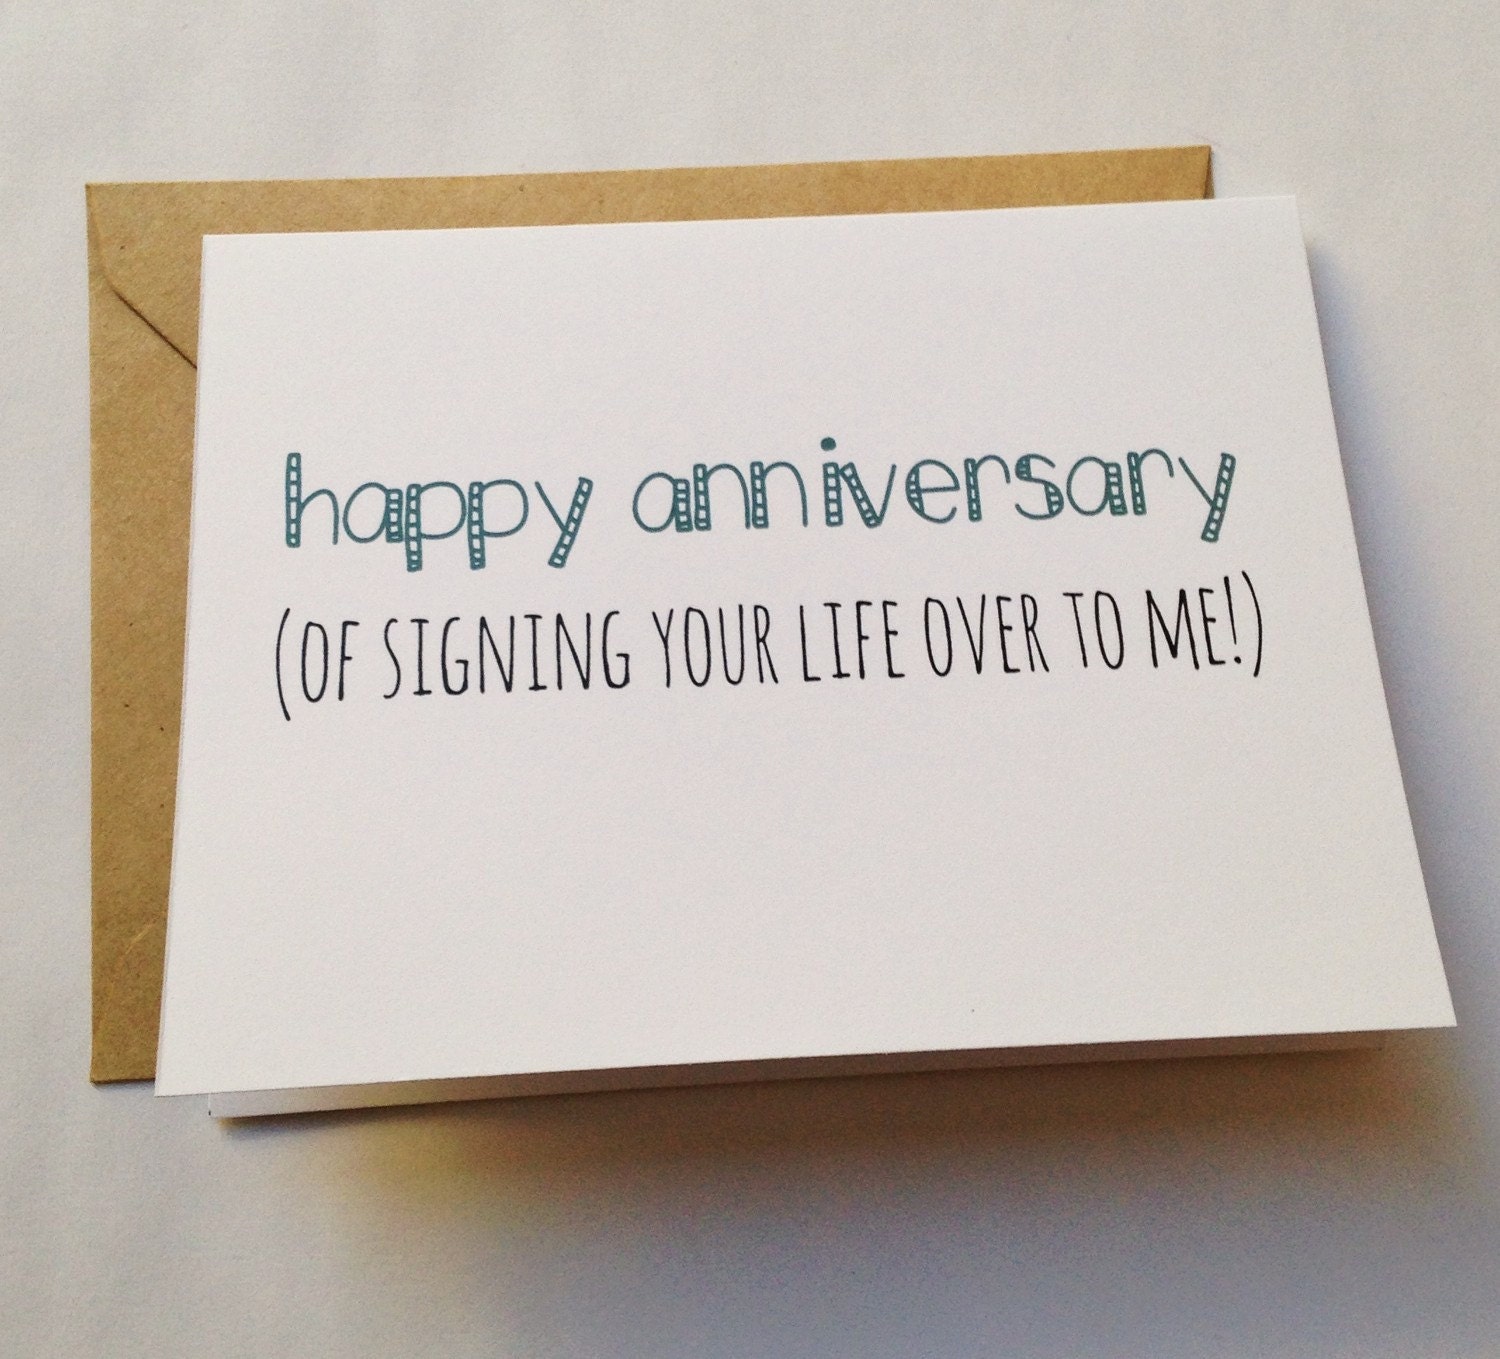 Funny Anniversary Card / Humor Anniversary Card / Marriage